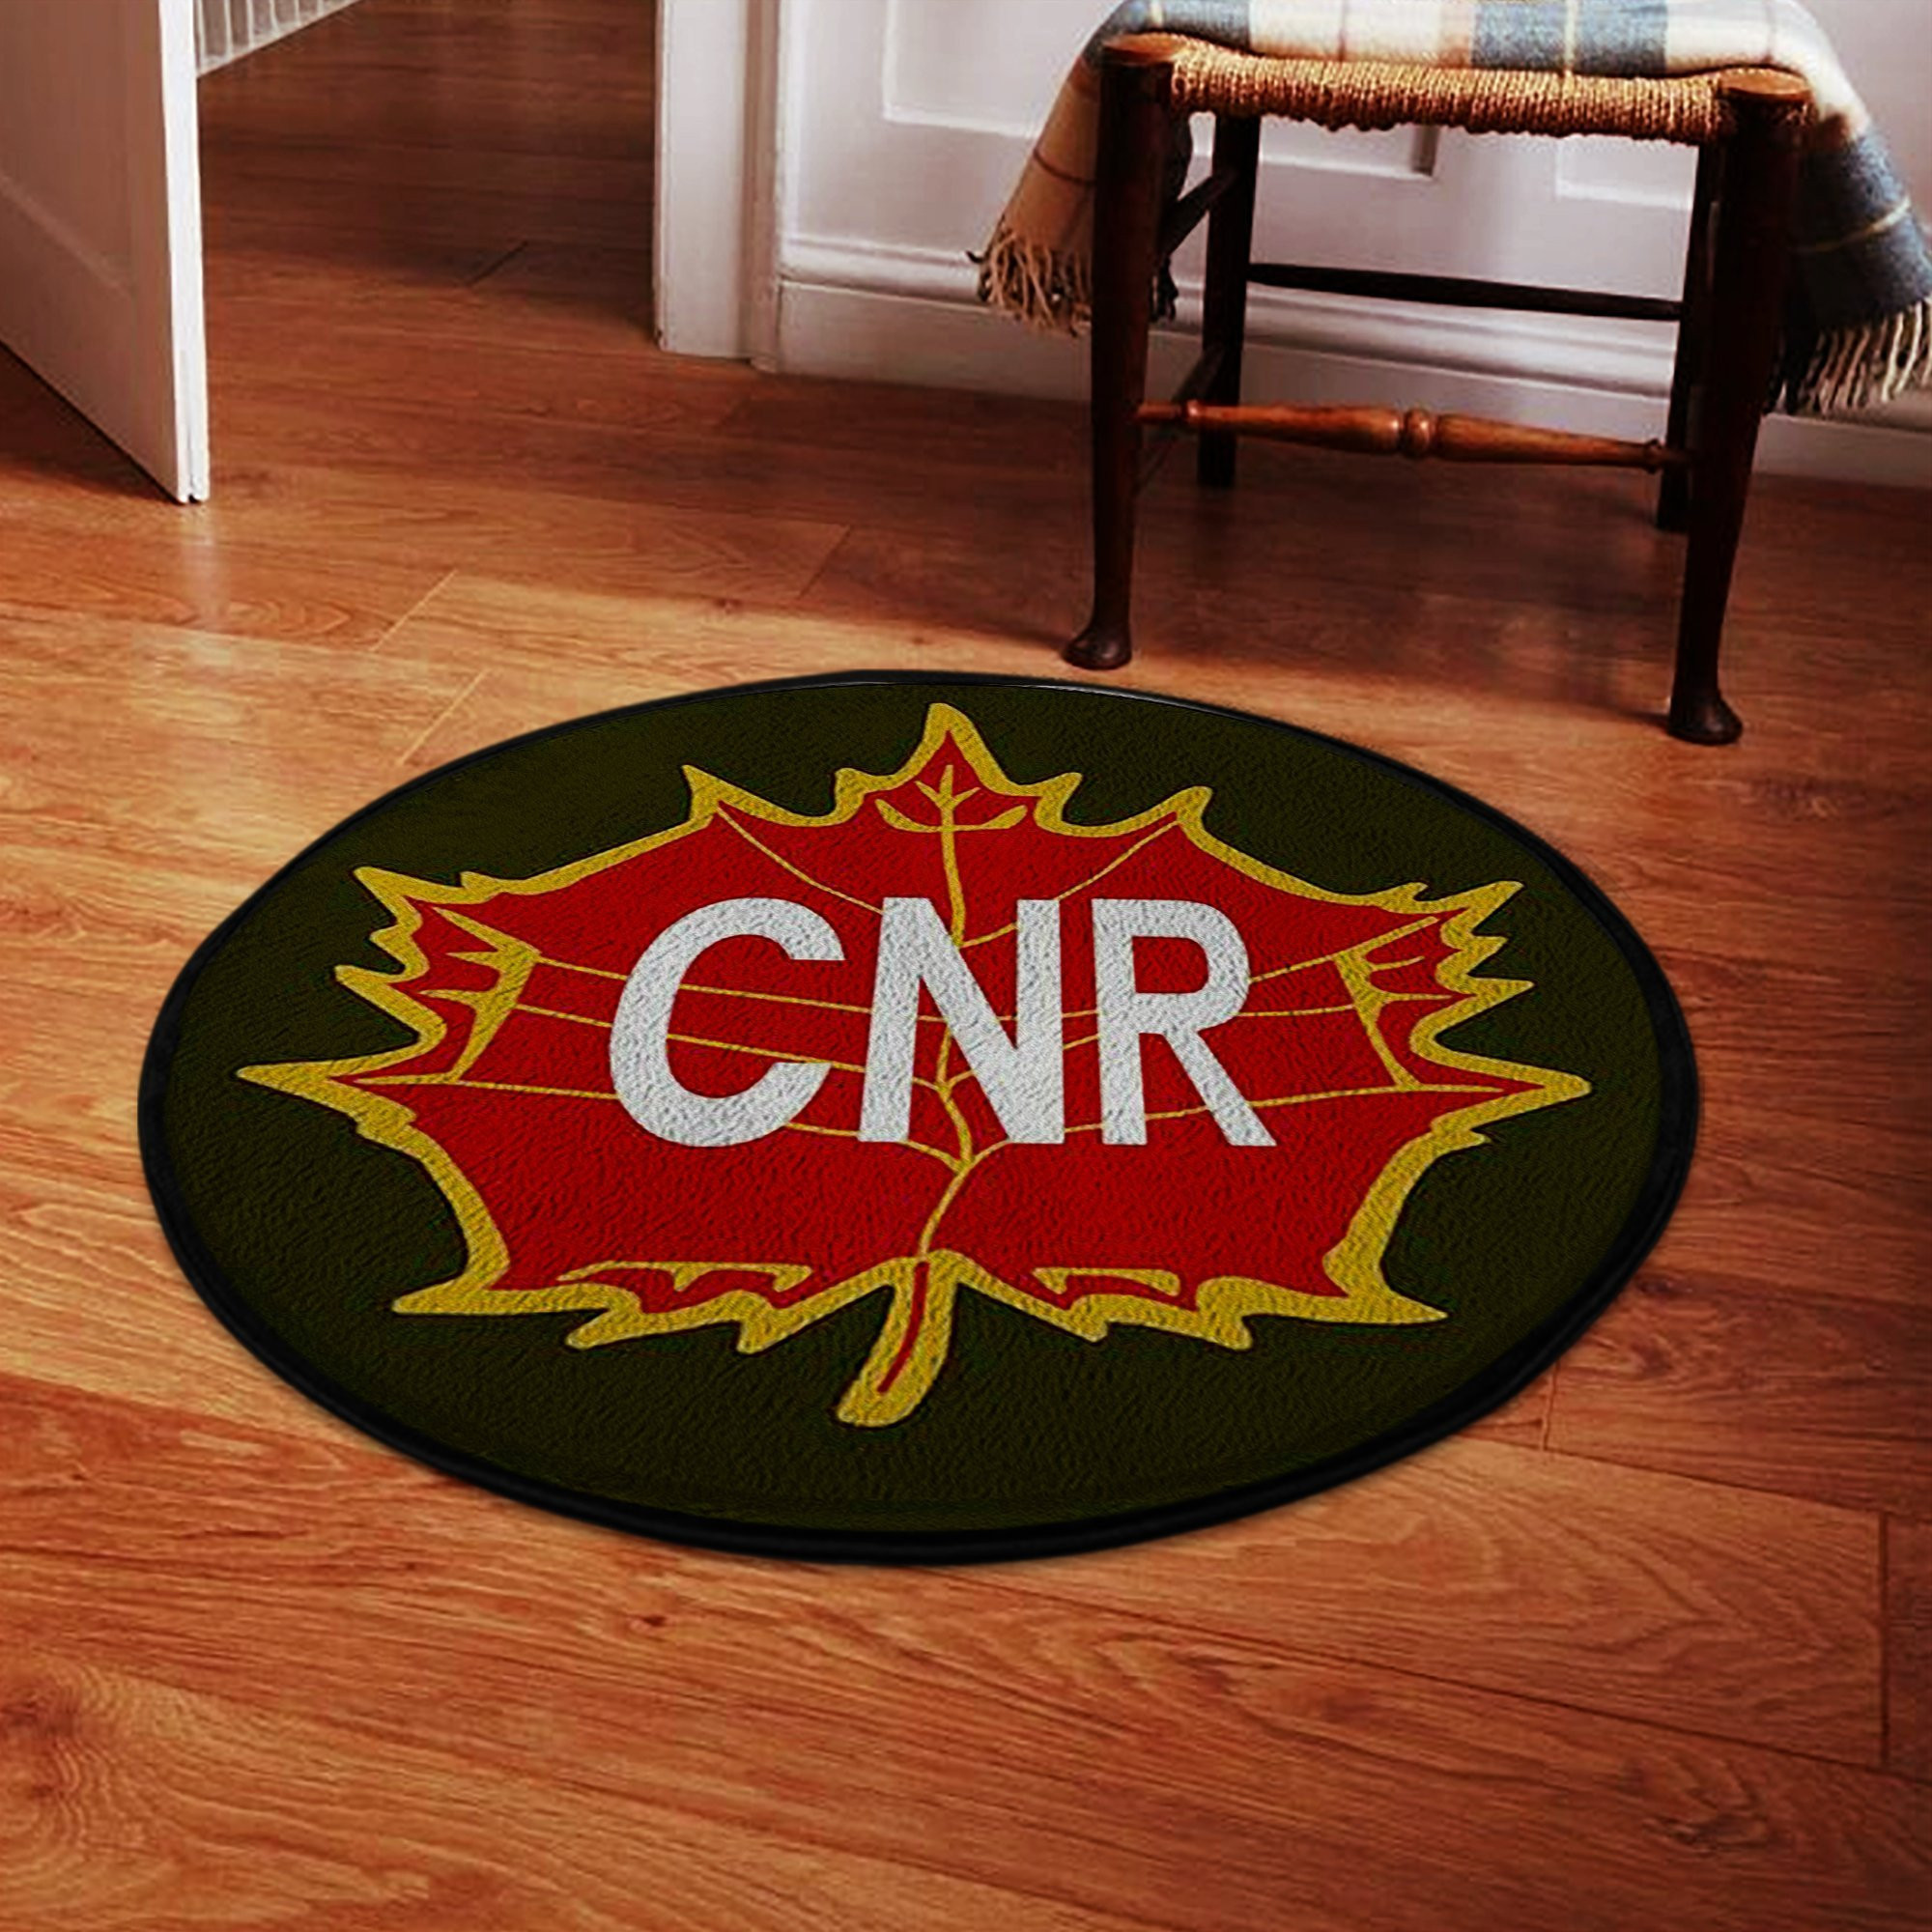 Vintage Style Round Floor Mat Room Rugs Carpet Canadian National Railway Railroad Round Mat Round Floor Mat Room Rugs Carpet Outdoor Rug Washable Rugs S (24In)